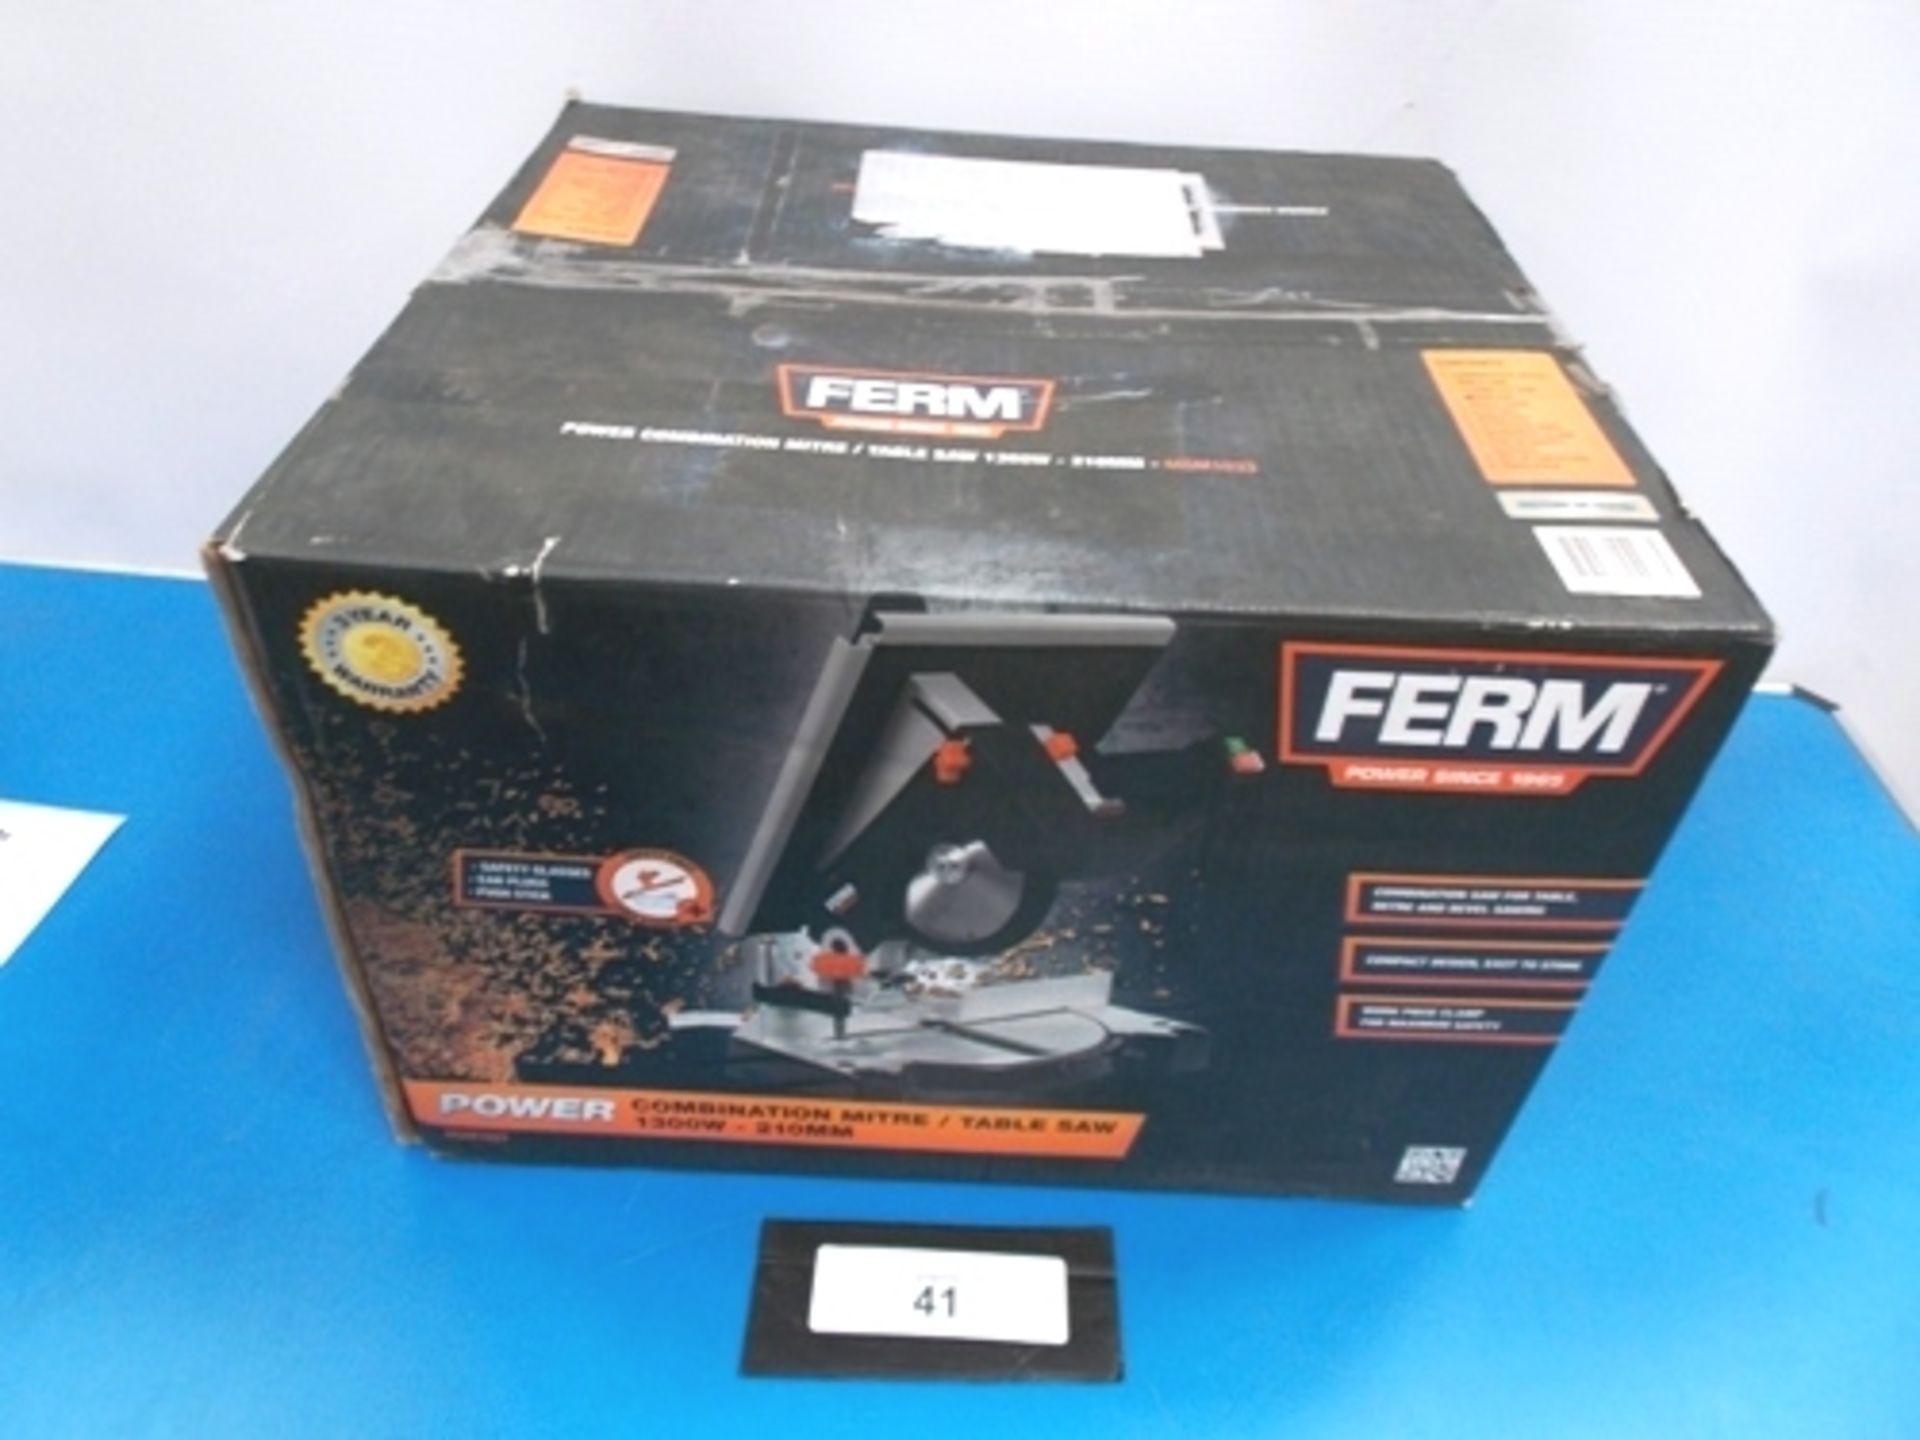 Ferm power combination mitre/table saw, 1300W, product no. MSM1033 - New in box